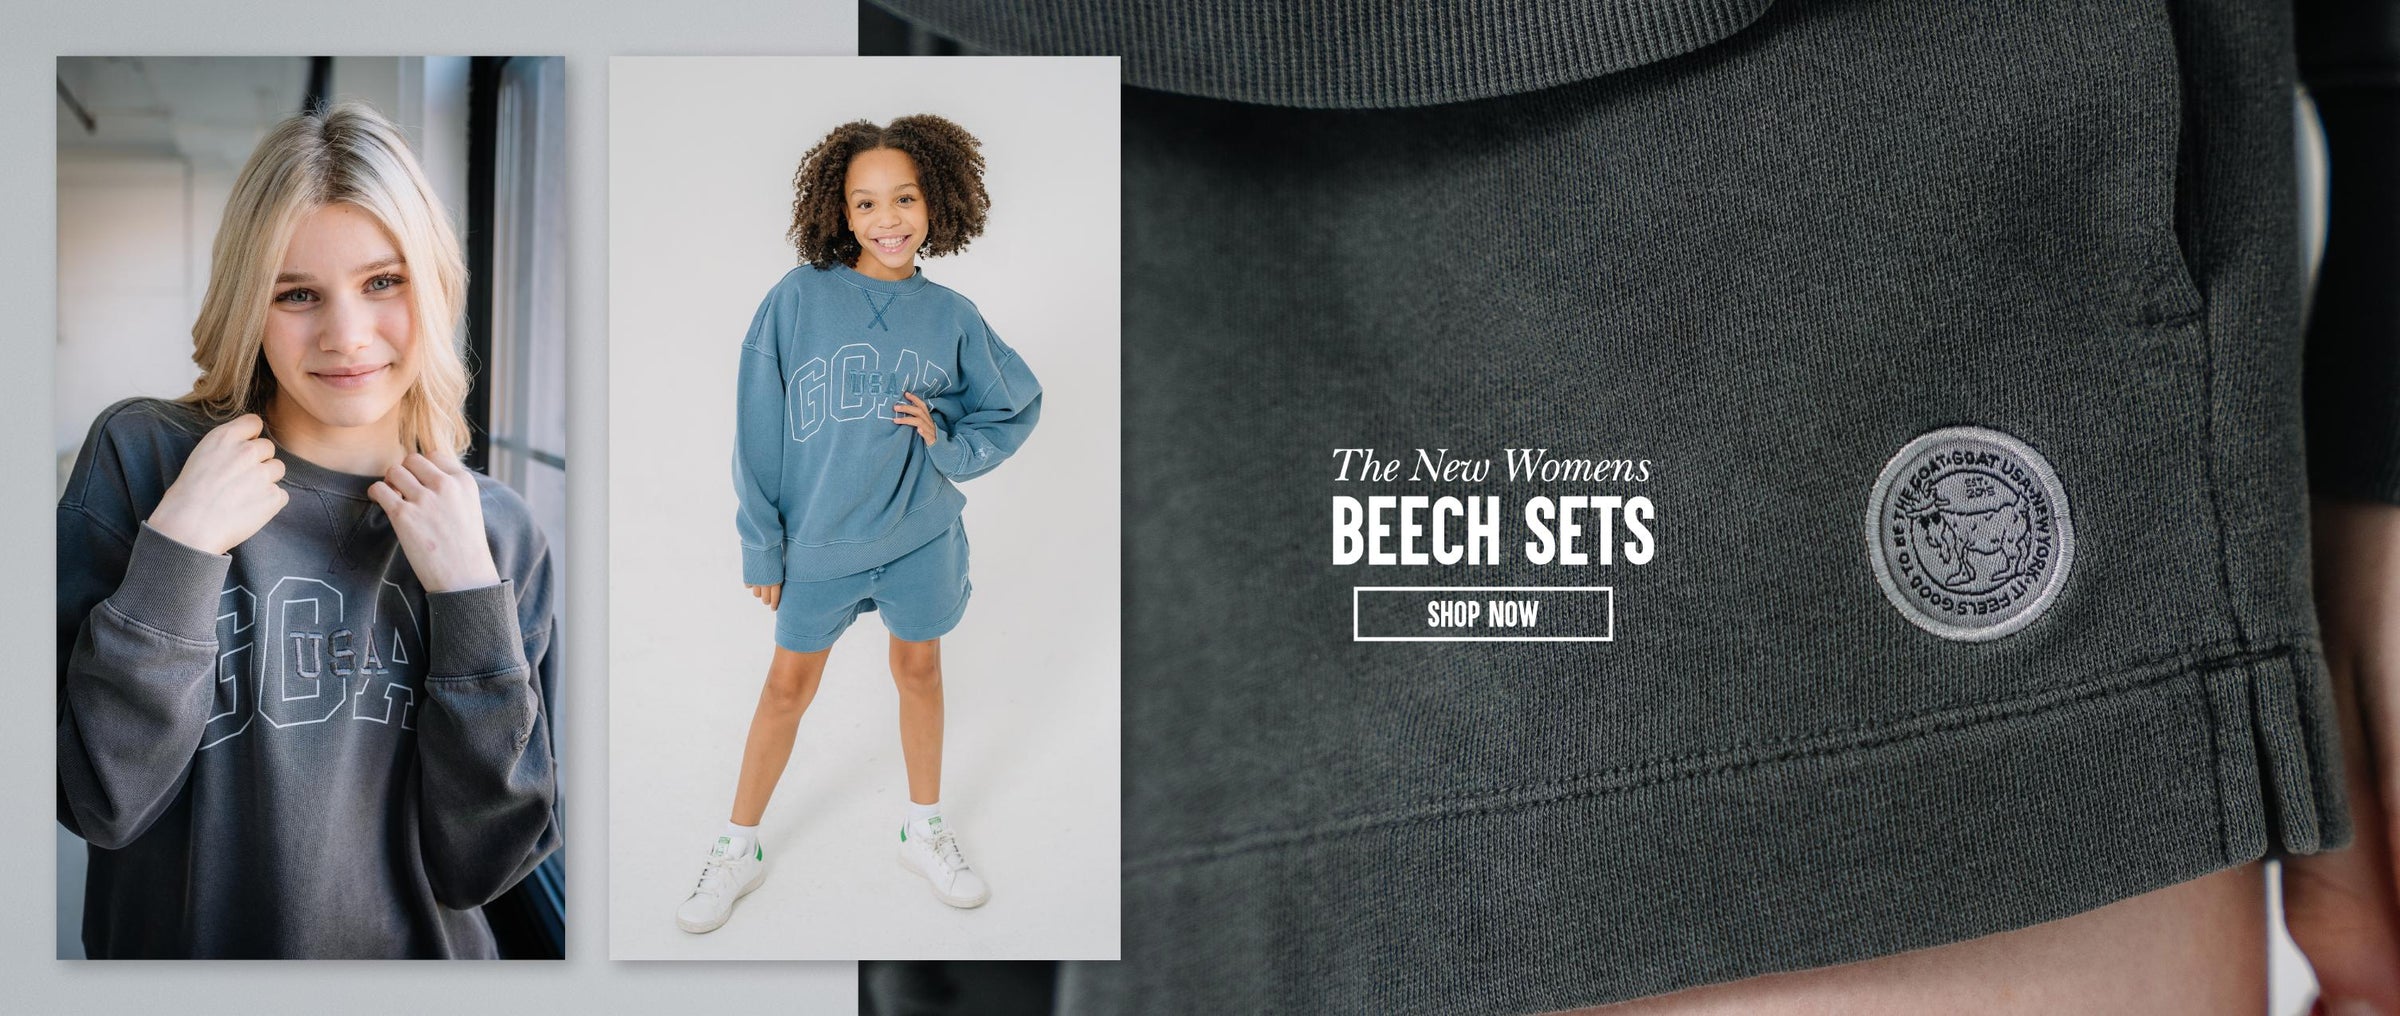 Two girls wearing matching sets with text that reads "The New Womens Beech Sets Shop Now"